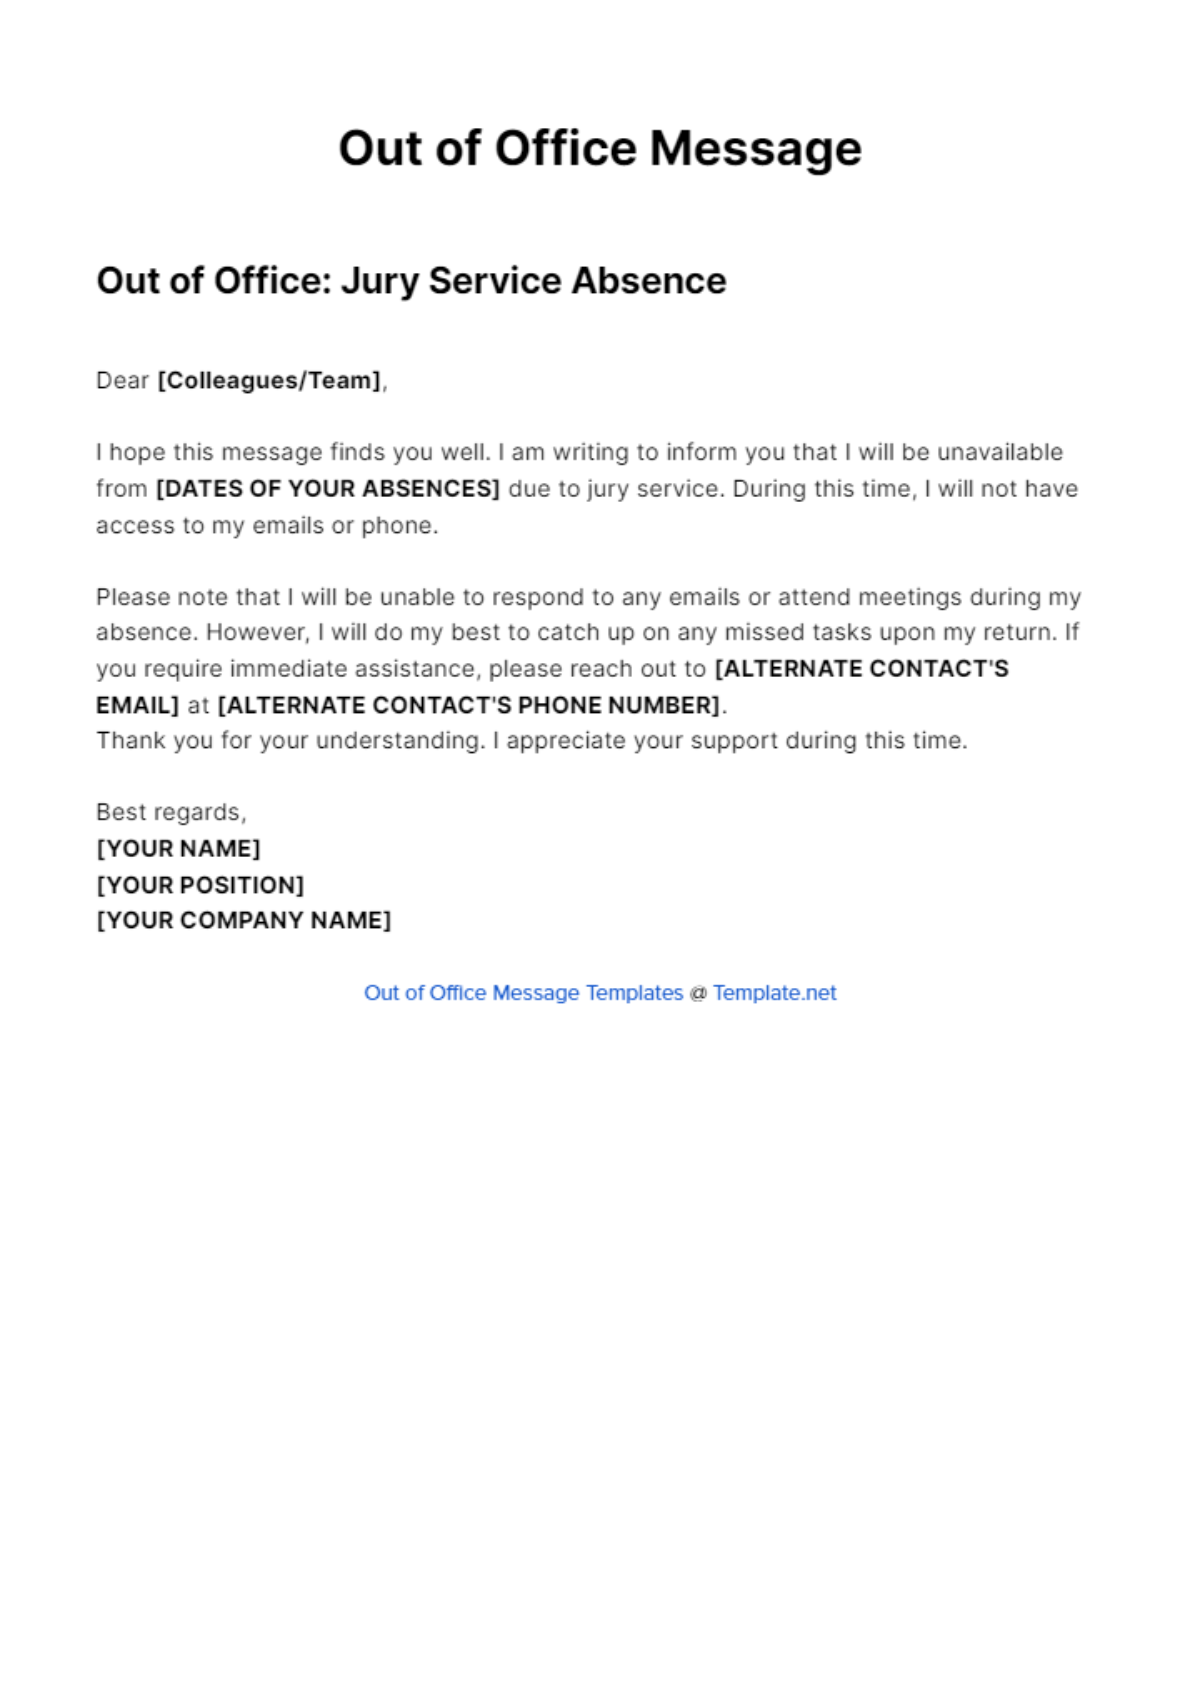 Jury Service Out Of Office Message Template